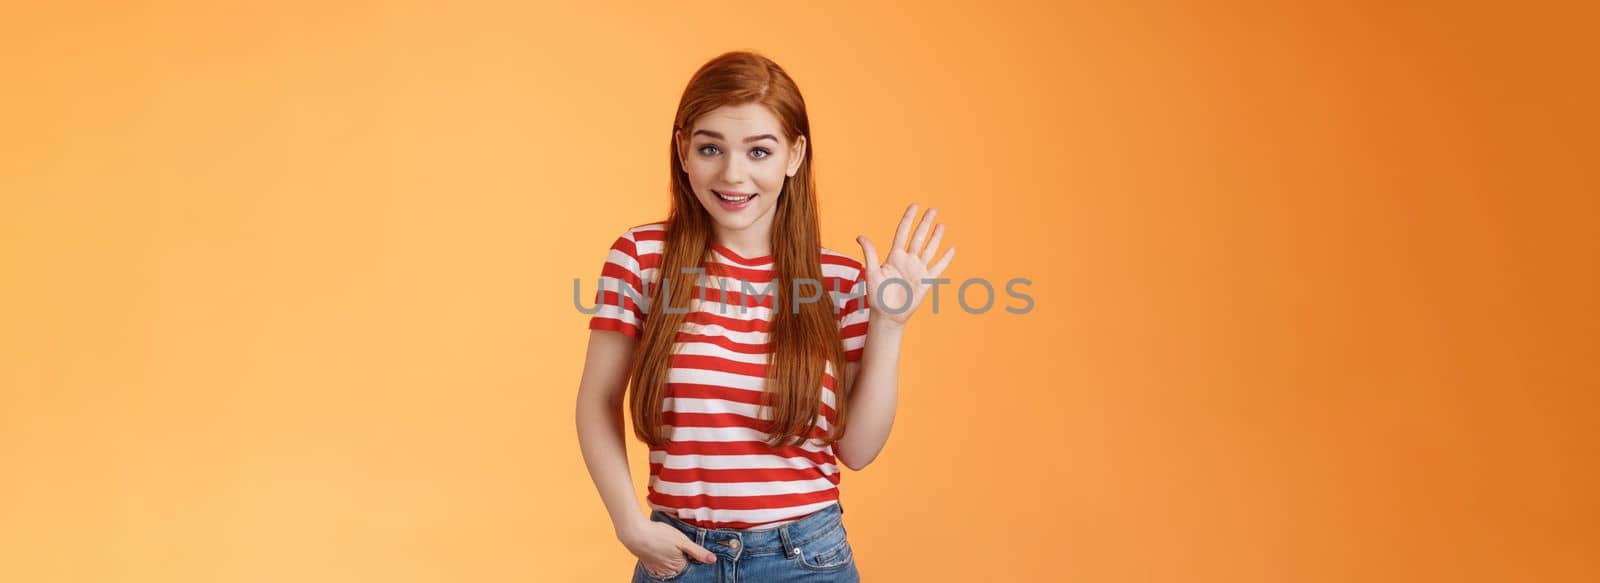 Hello how are you. Cute modest redhead newbie student female say hi, waving hand friendly, get know coworkers, smiling joyfully, introduce herself, welcome home, stand orange background.